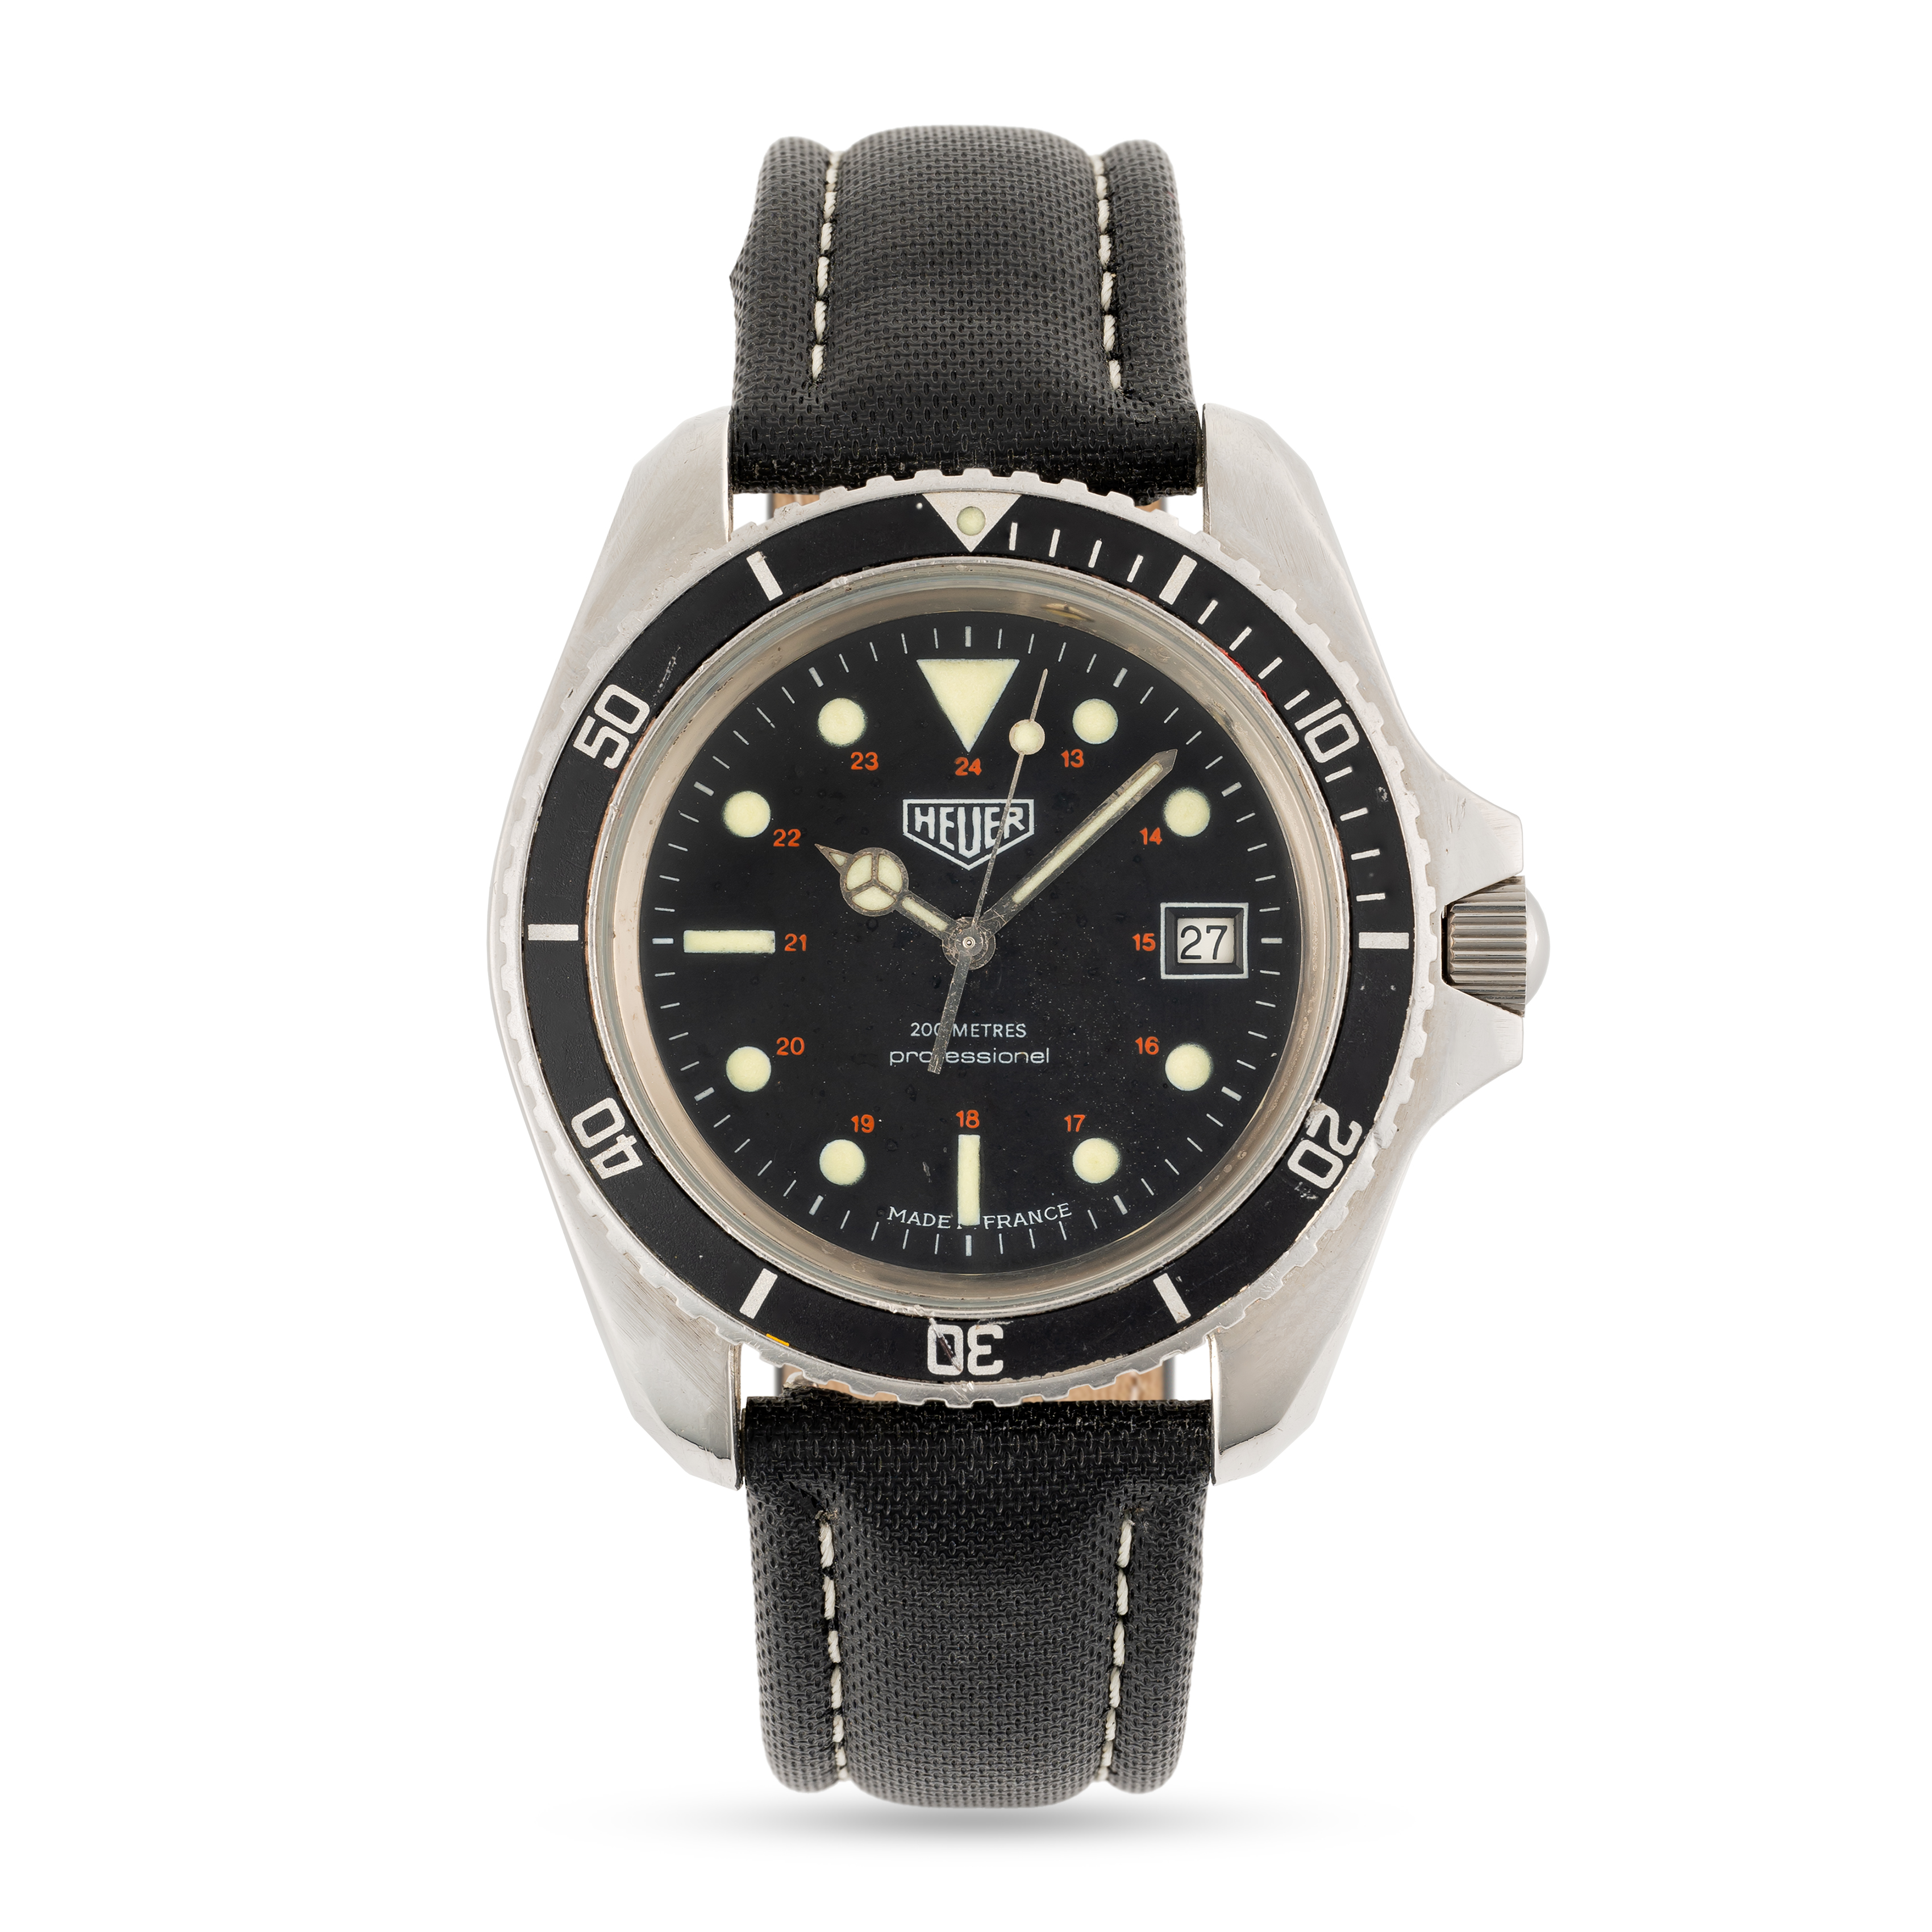 A RARE GENTLEMAN'S SIZE STAINLESS STEEL HEUER 200 METRES PROFESSIONEL AUTOMATIC DIVERS WRIST WATCH - Image 2 of 8